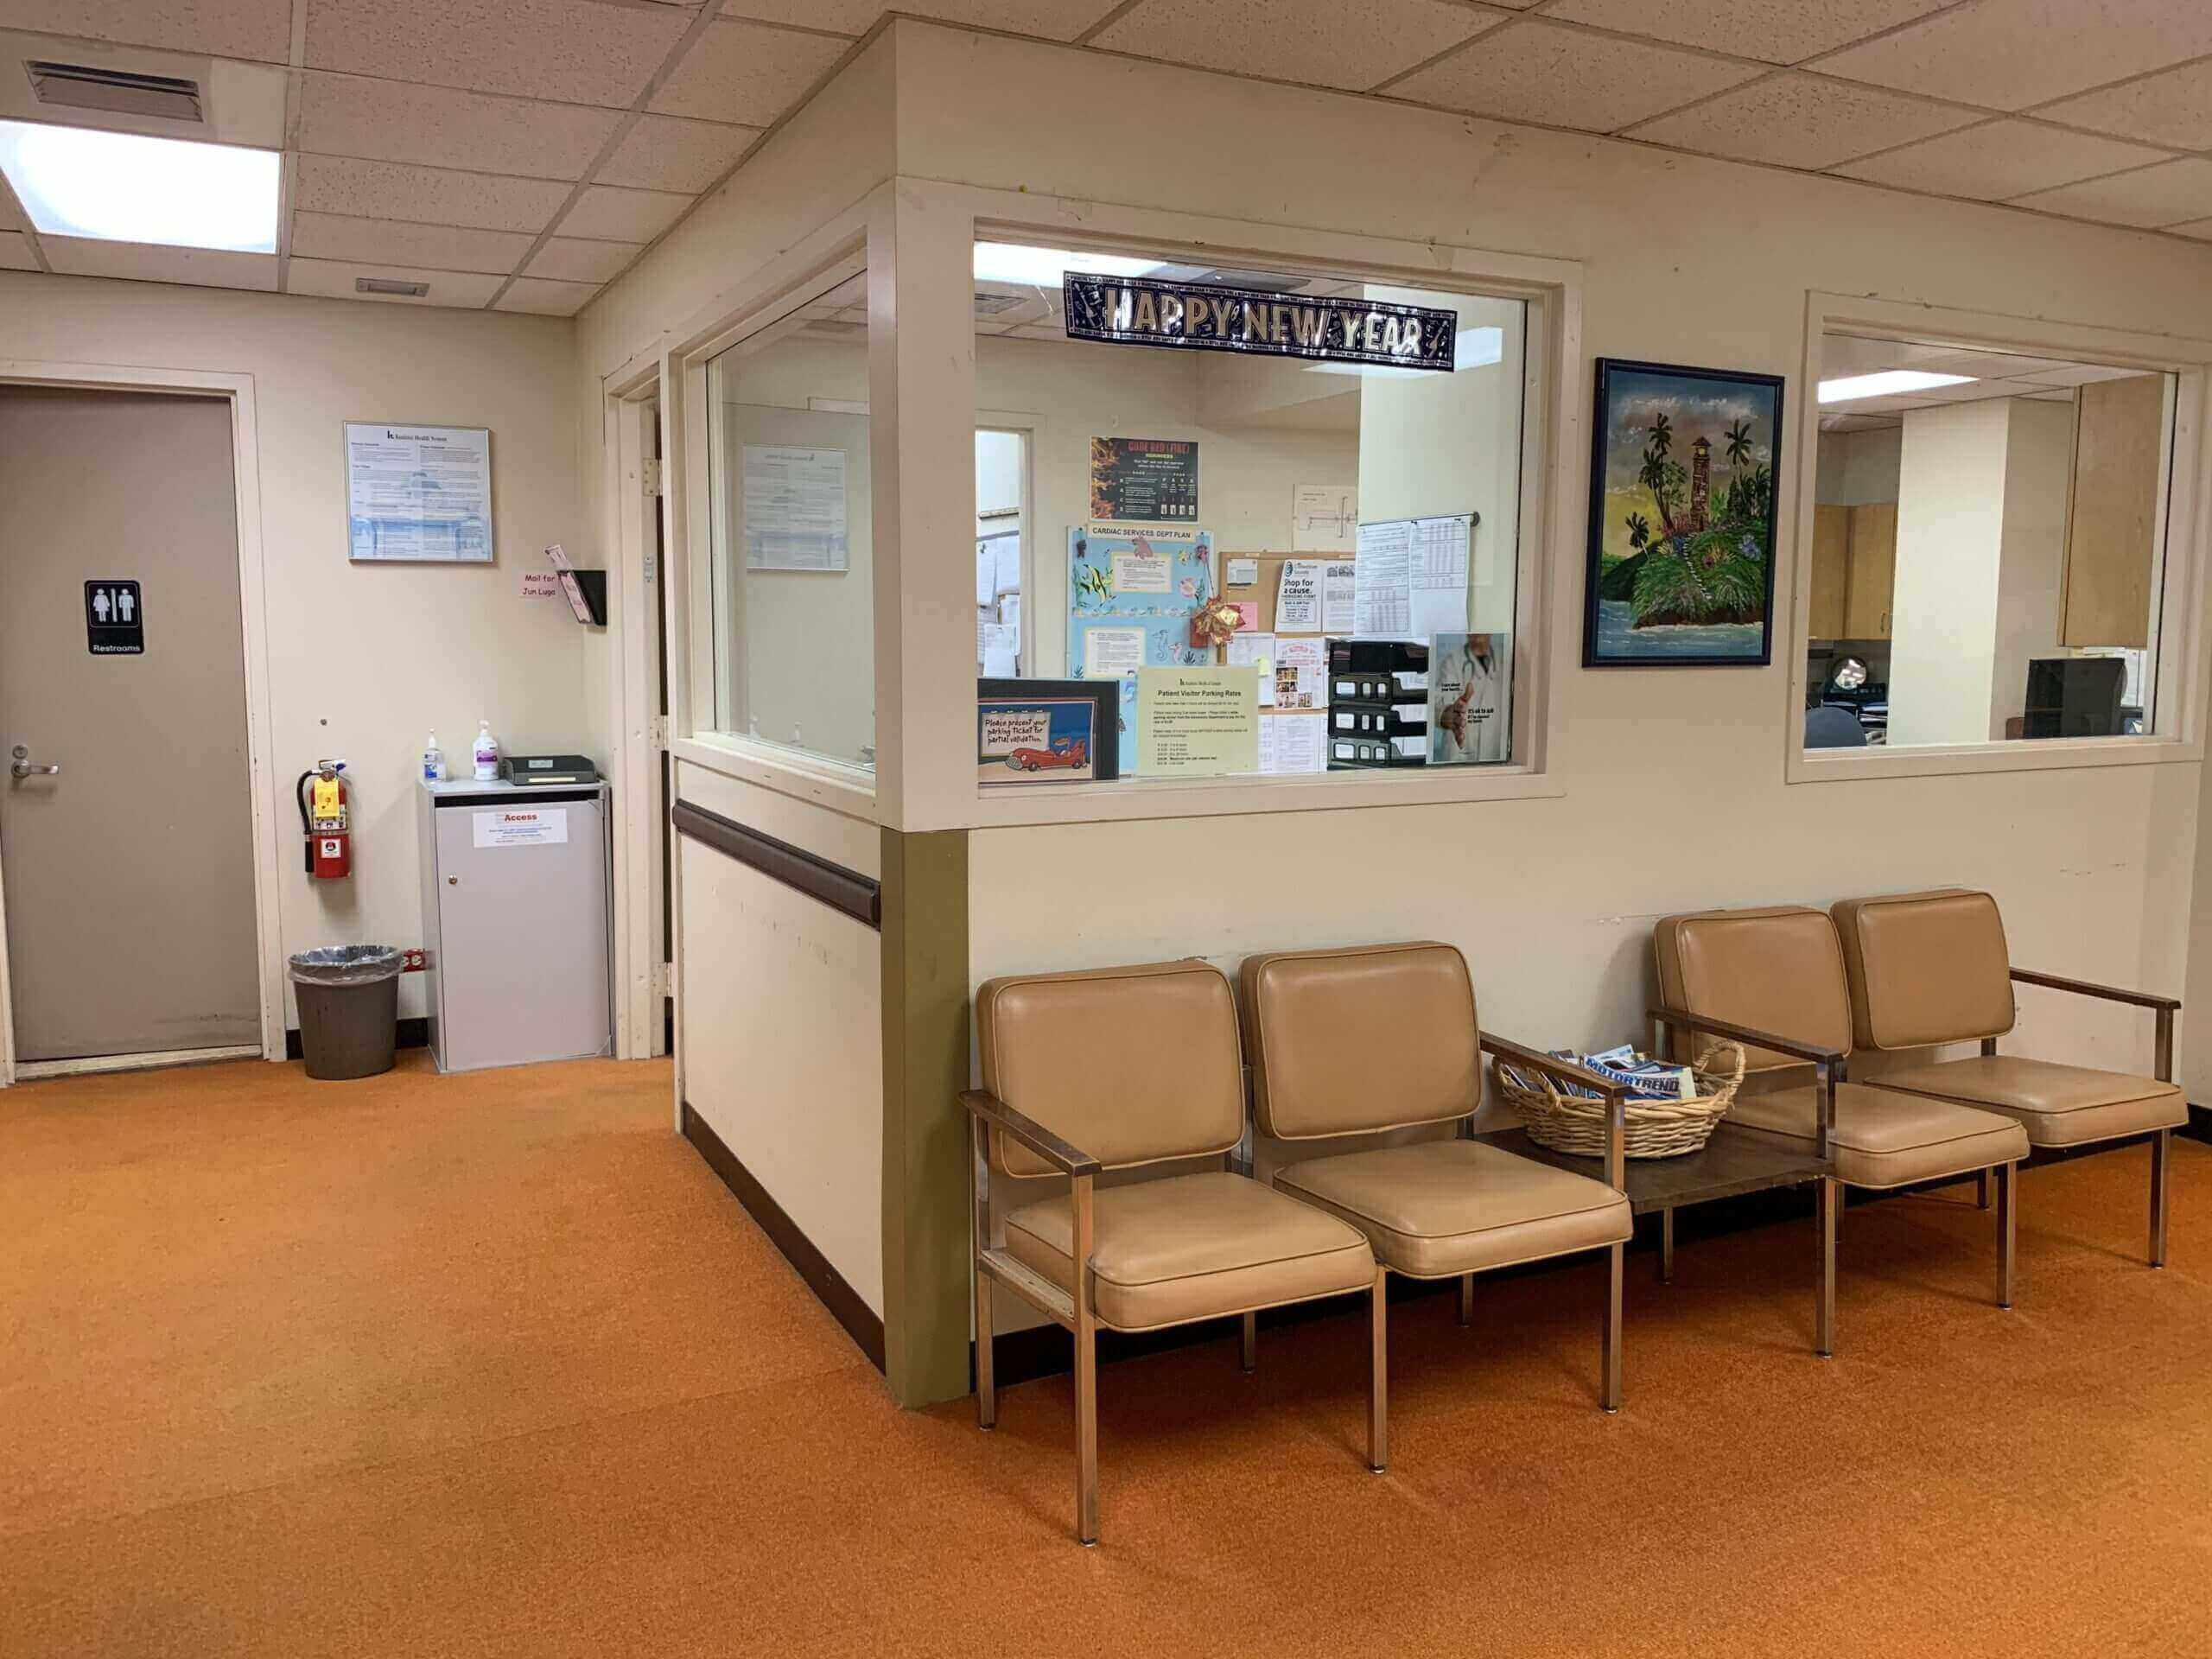 We sanitize waiting rooms like the one in the picture along with common areas and walk ways so your customers stay health and clean.